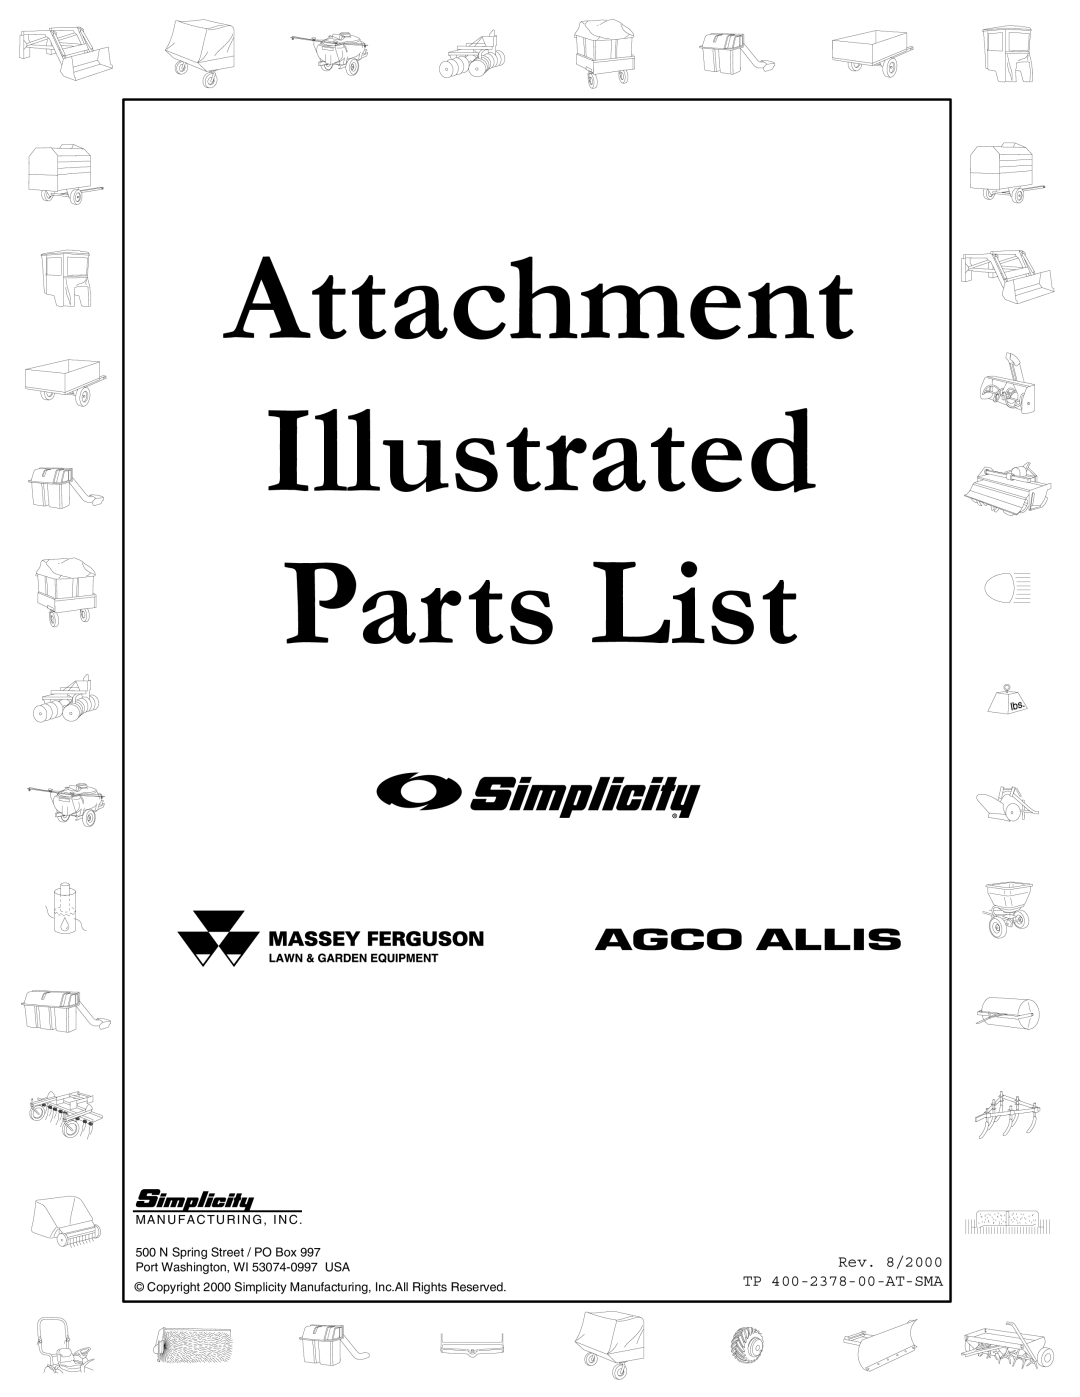 Simplicity 1693756 manual Attachment Illustrated Parts List, Rev. 8/2000 TP 400-2378-00-AT-SMA, N Spring Street / PO Box 